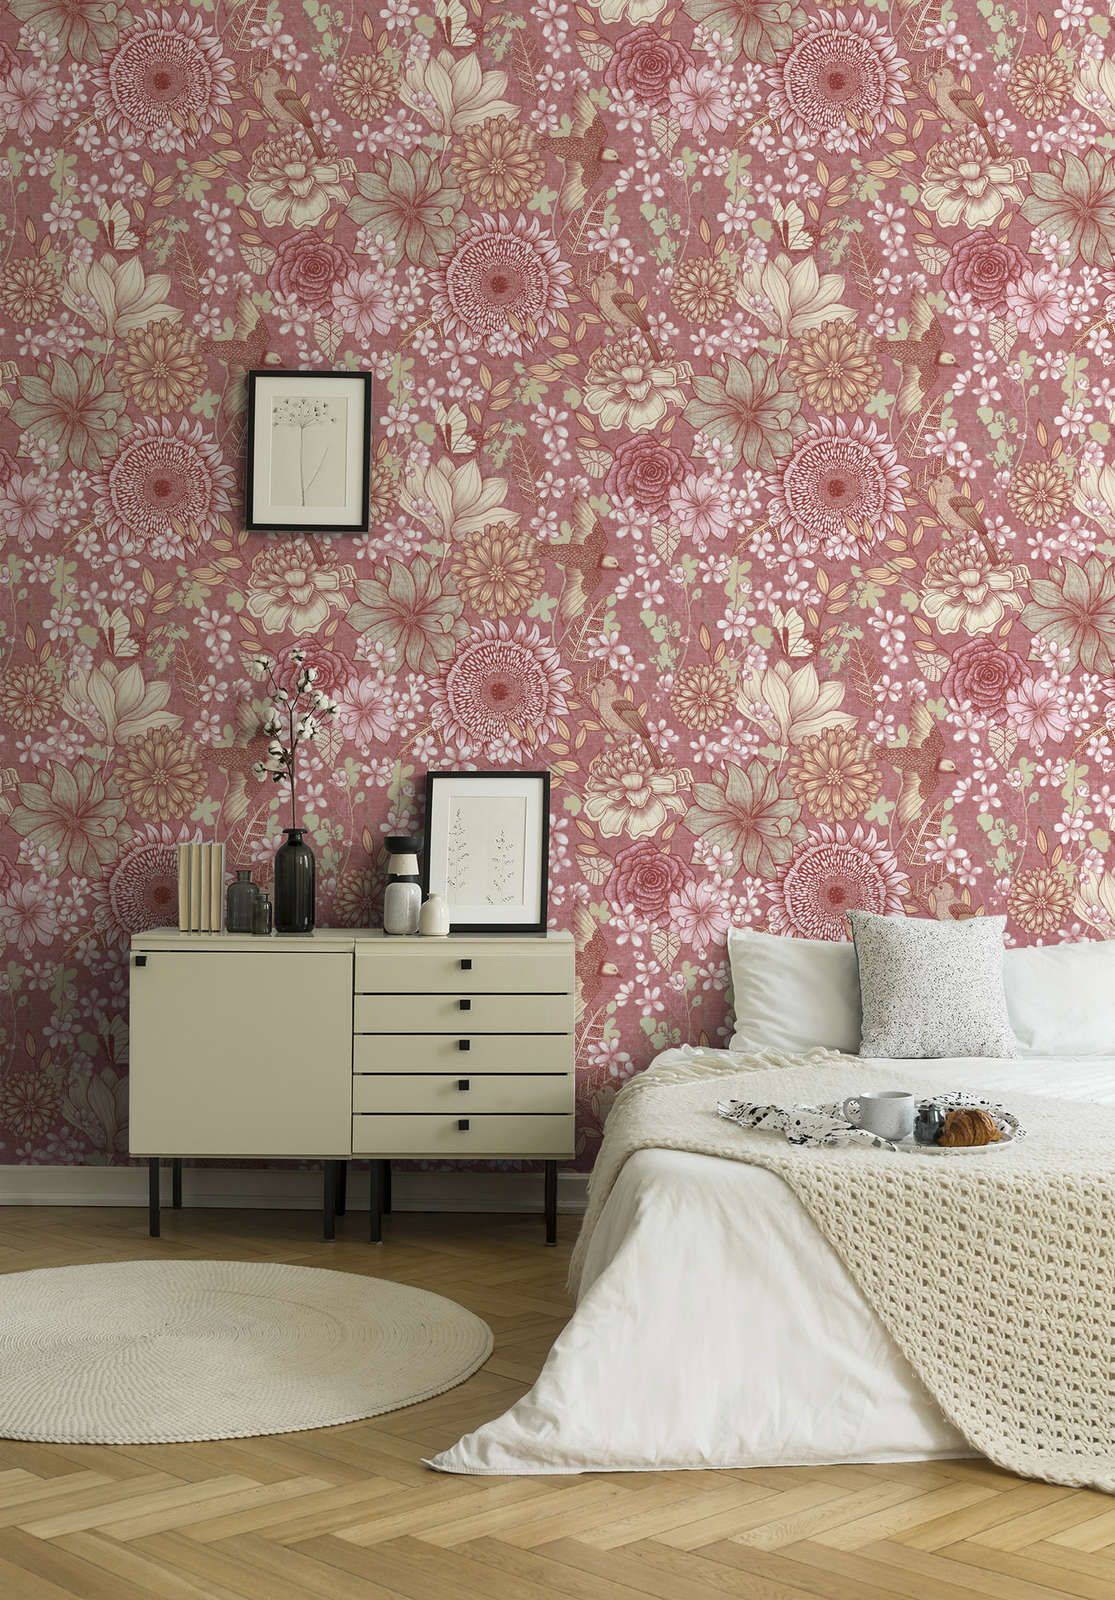             Floral non-woven wallpaper with various flowers and leaves - pink, white, cream
        